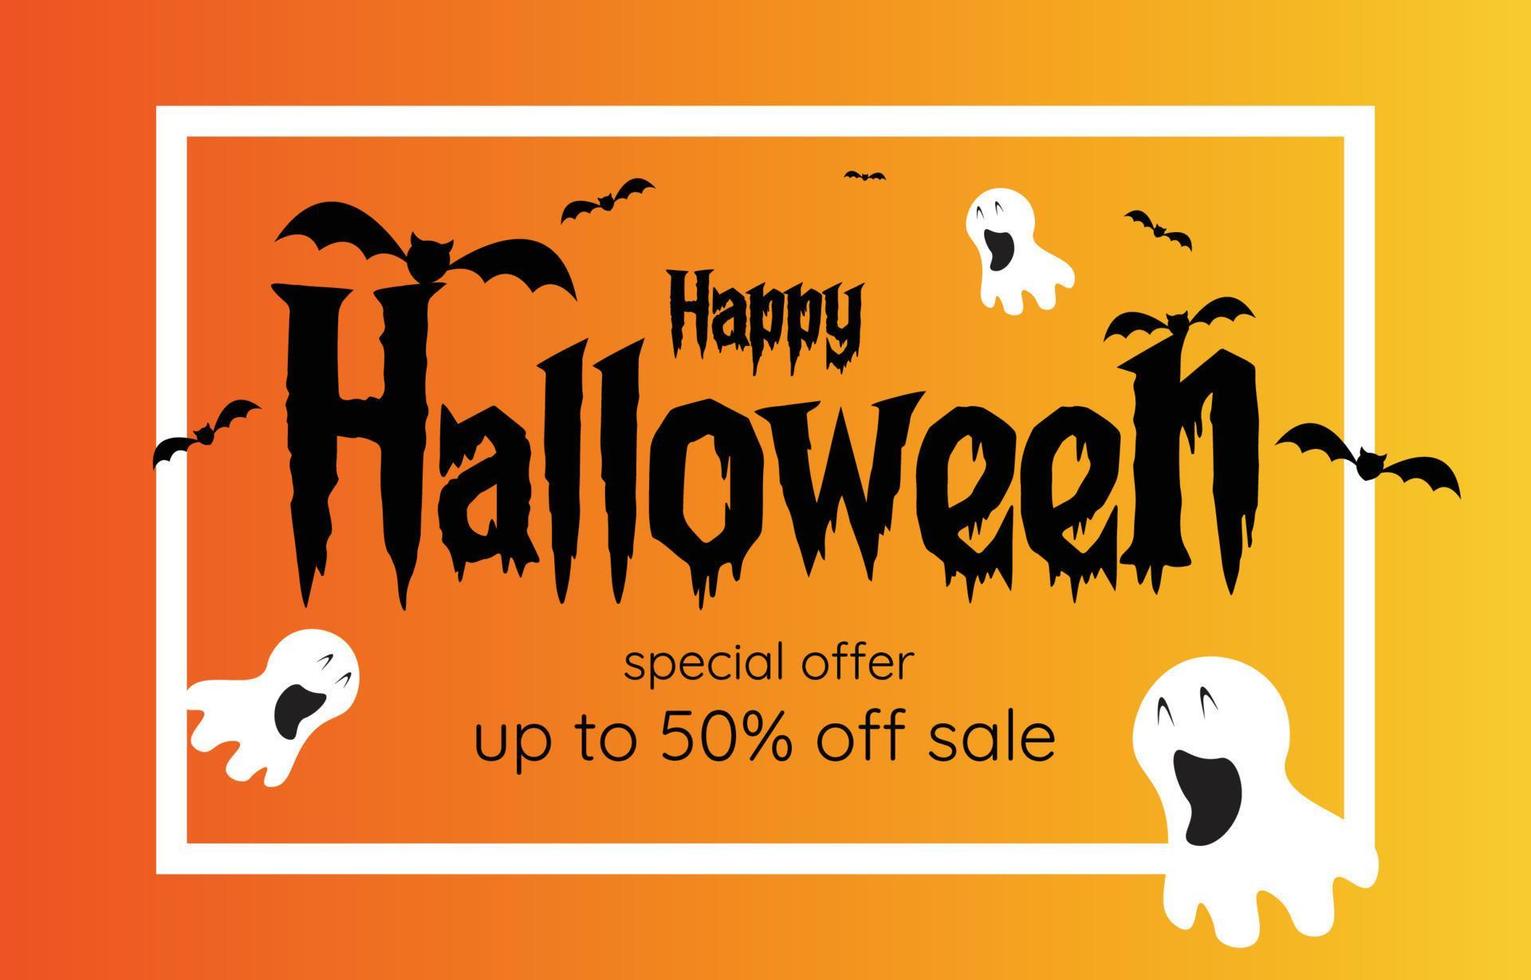 Halloween background. Special offers and shopping discounts. Halloween sale horizontal banner.Vector illustration holiday promotion decorated with cartoon ghosts and bats. vector